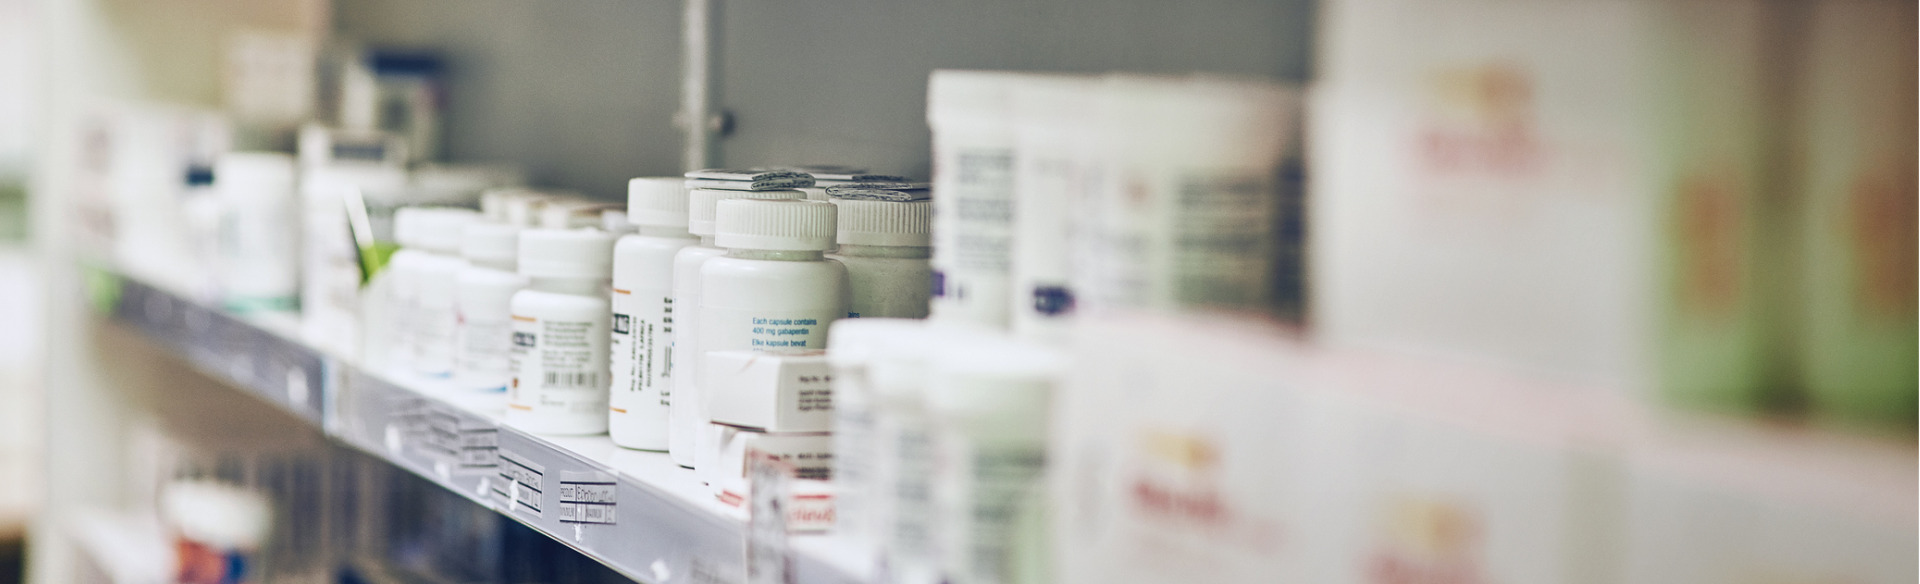 various medications lined up on a pharmacy shelf